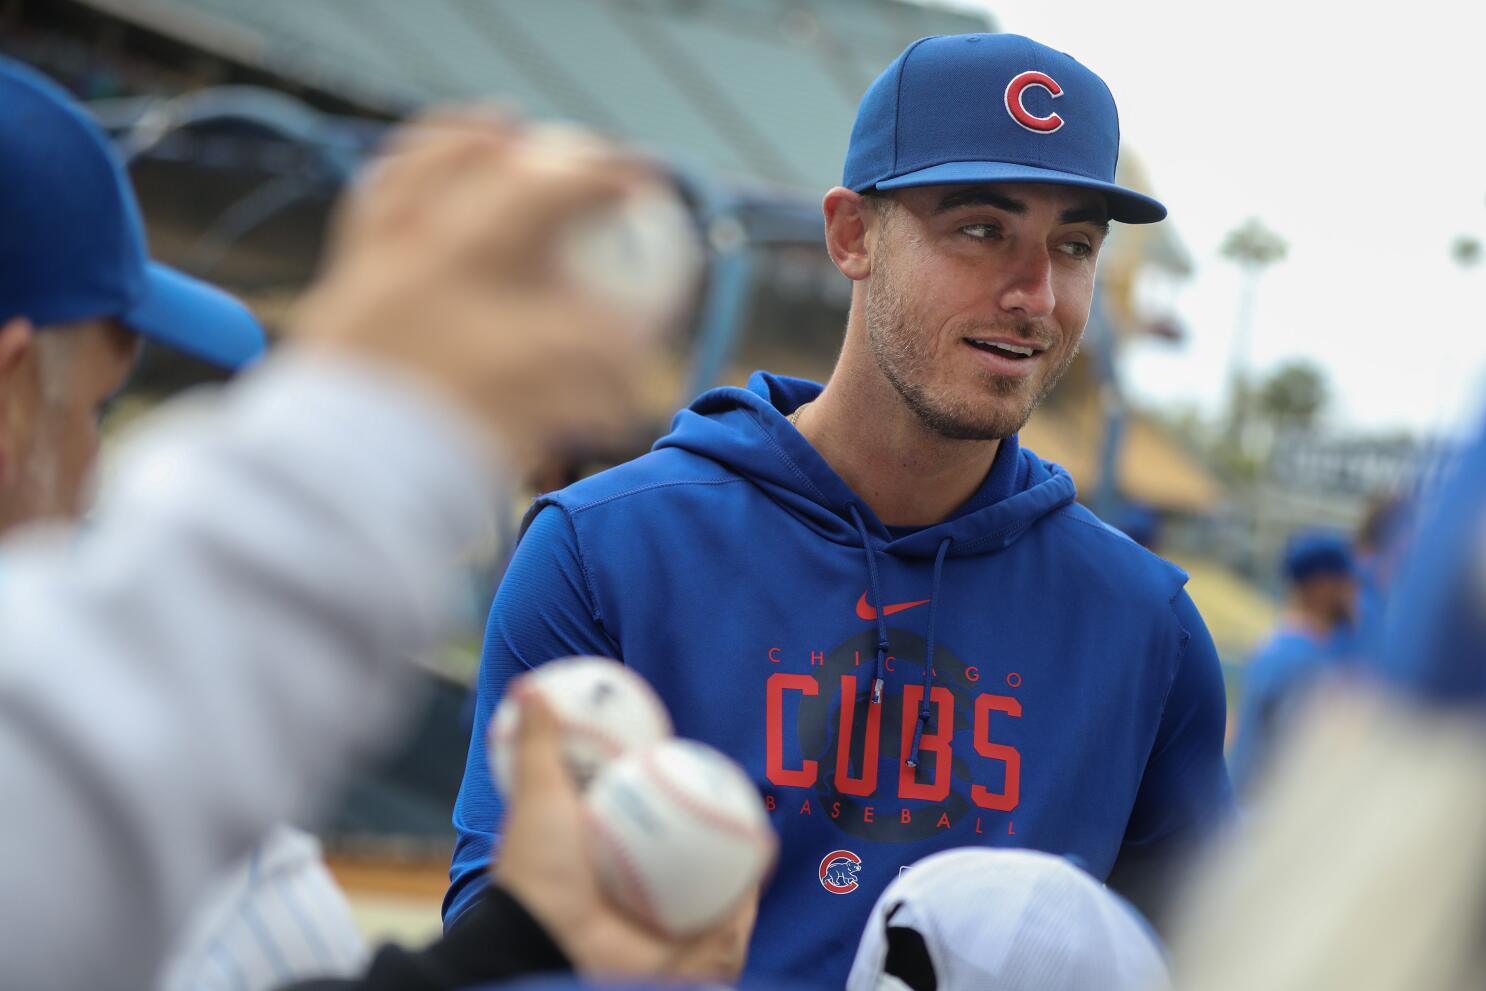 Cubs should ABSOLUTELY pursue Cody Bellinger if he becomes free